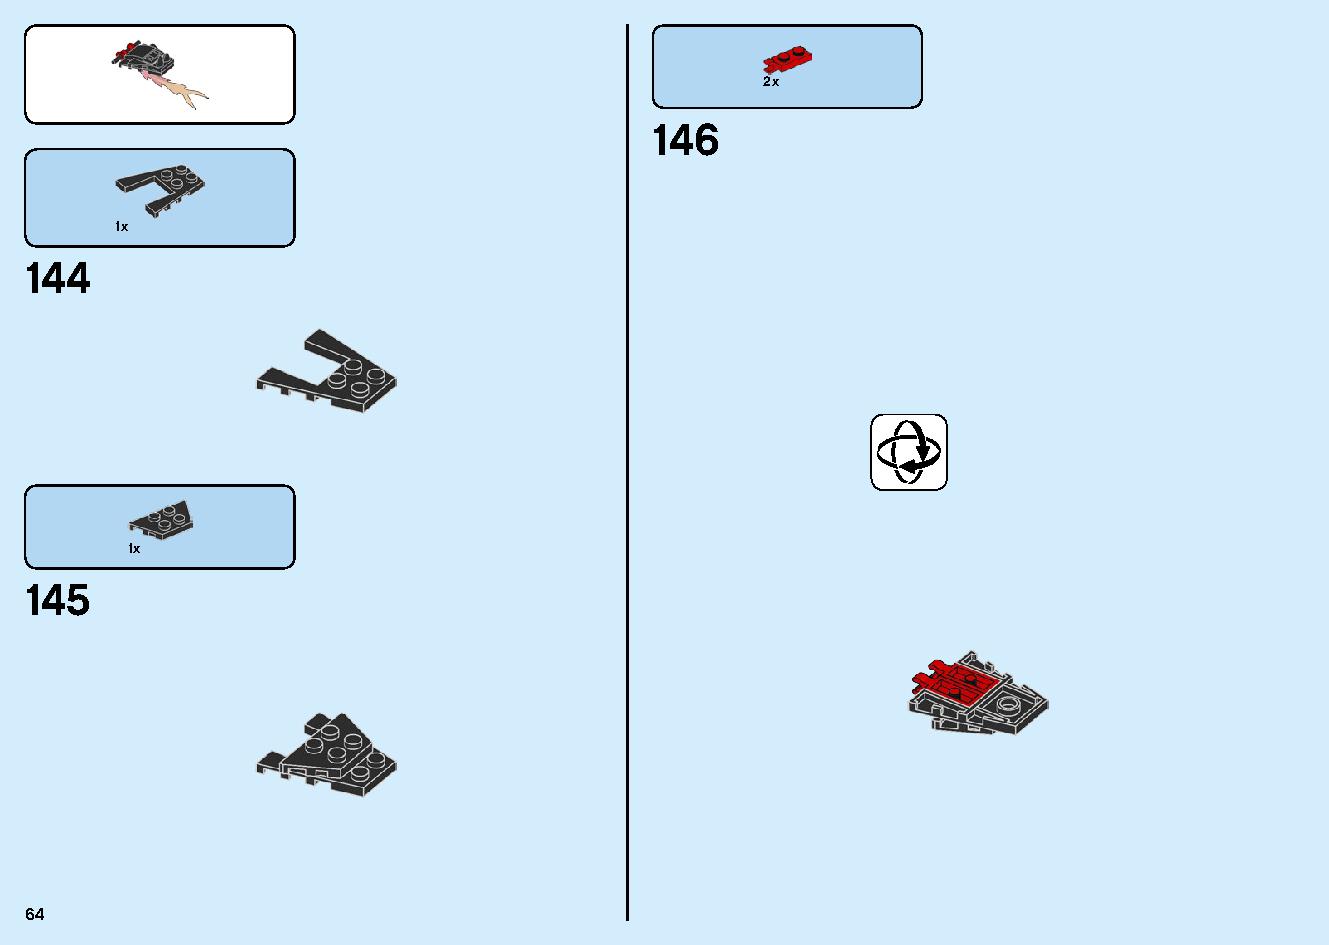 Fire Fang 70674 LEGO information LEGO instructions 64 page